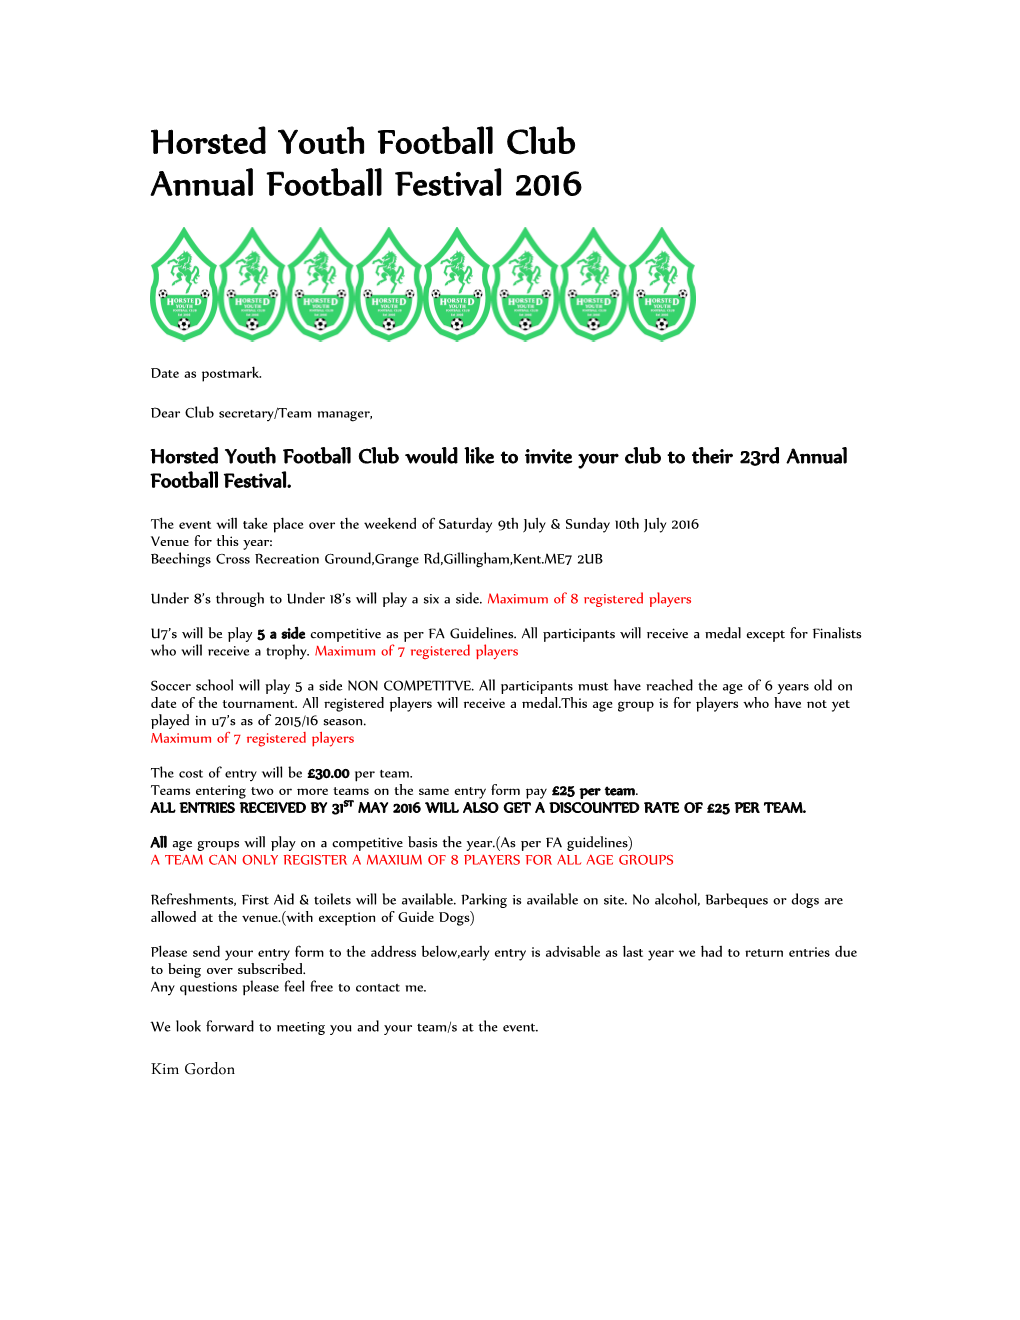 Horsted Youth Football Club